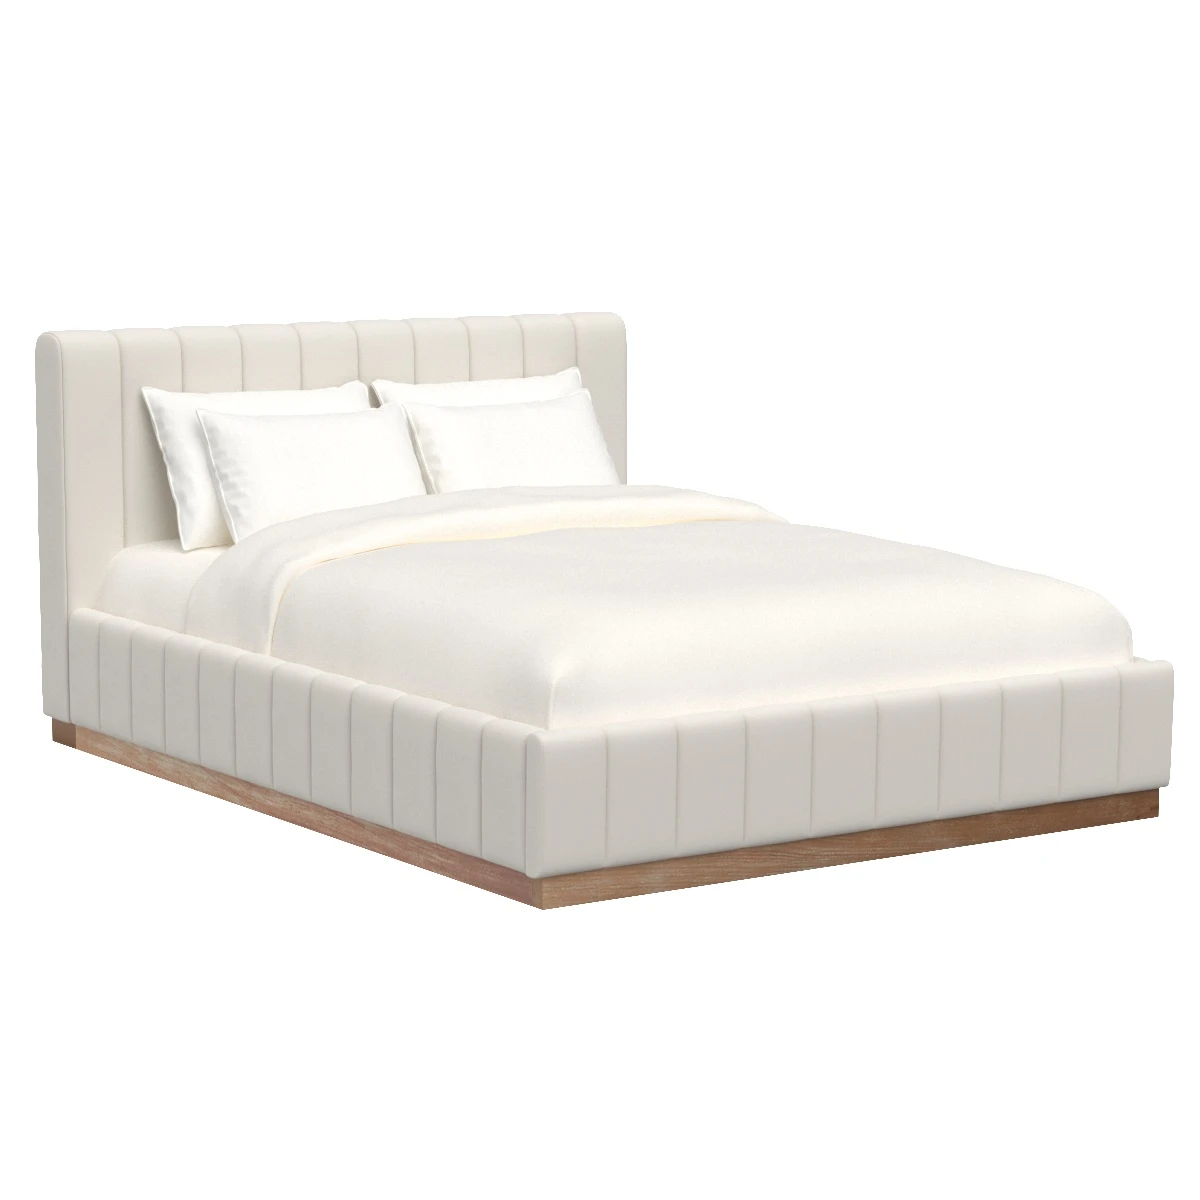 Forte White Queen Bed 3D Model_01